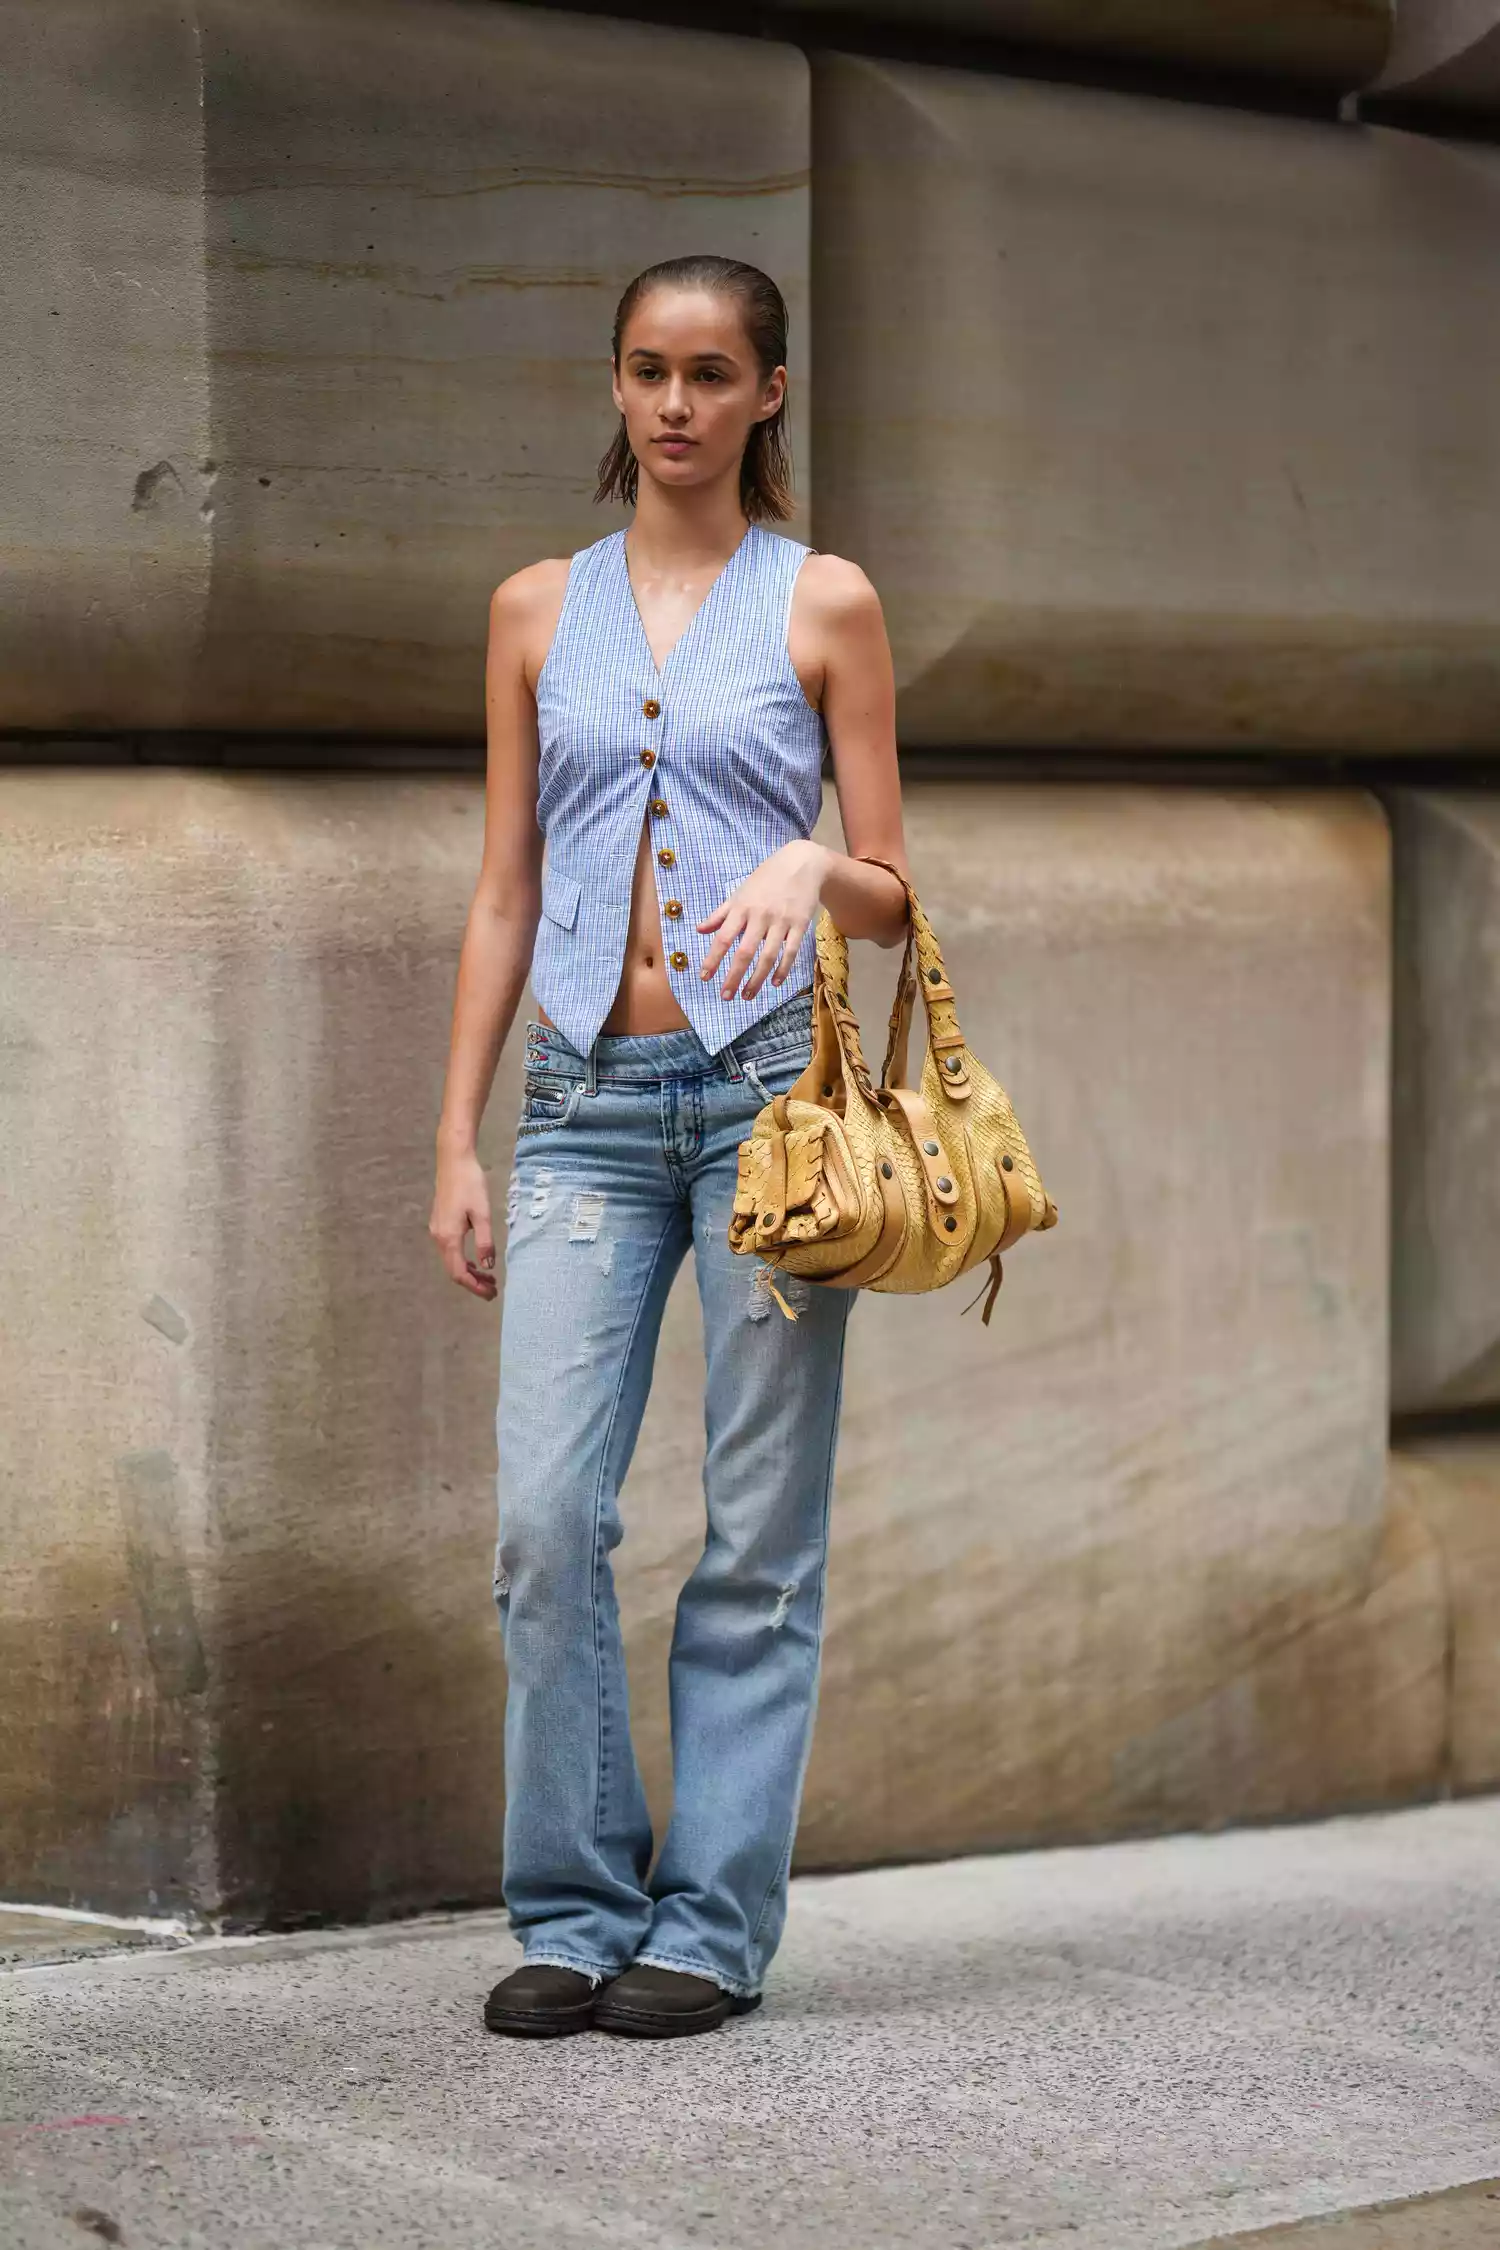 A model wears a blue waistcoat, a yellow bag, blue flared ripped jeans, brown shoes, a shopping bag